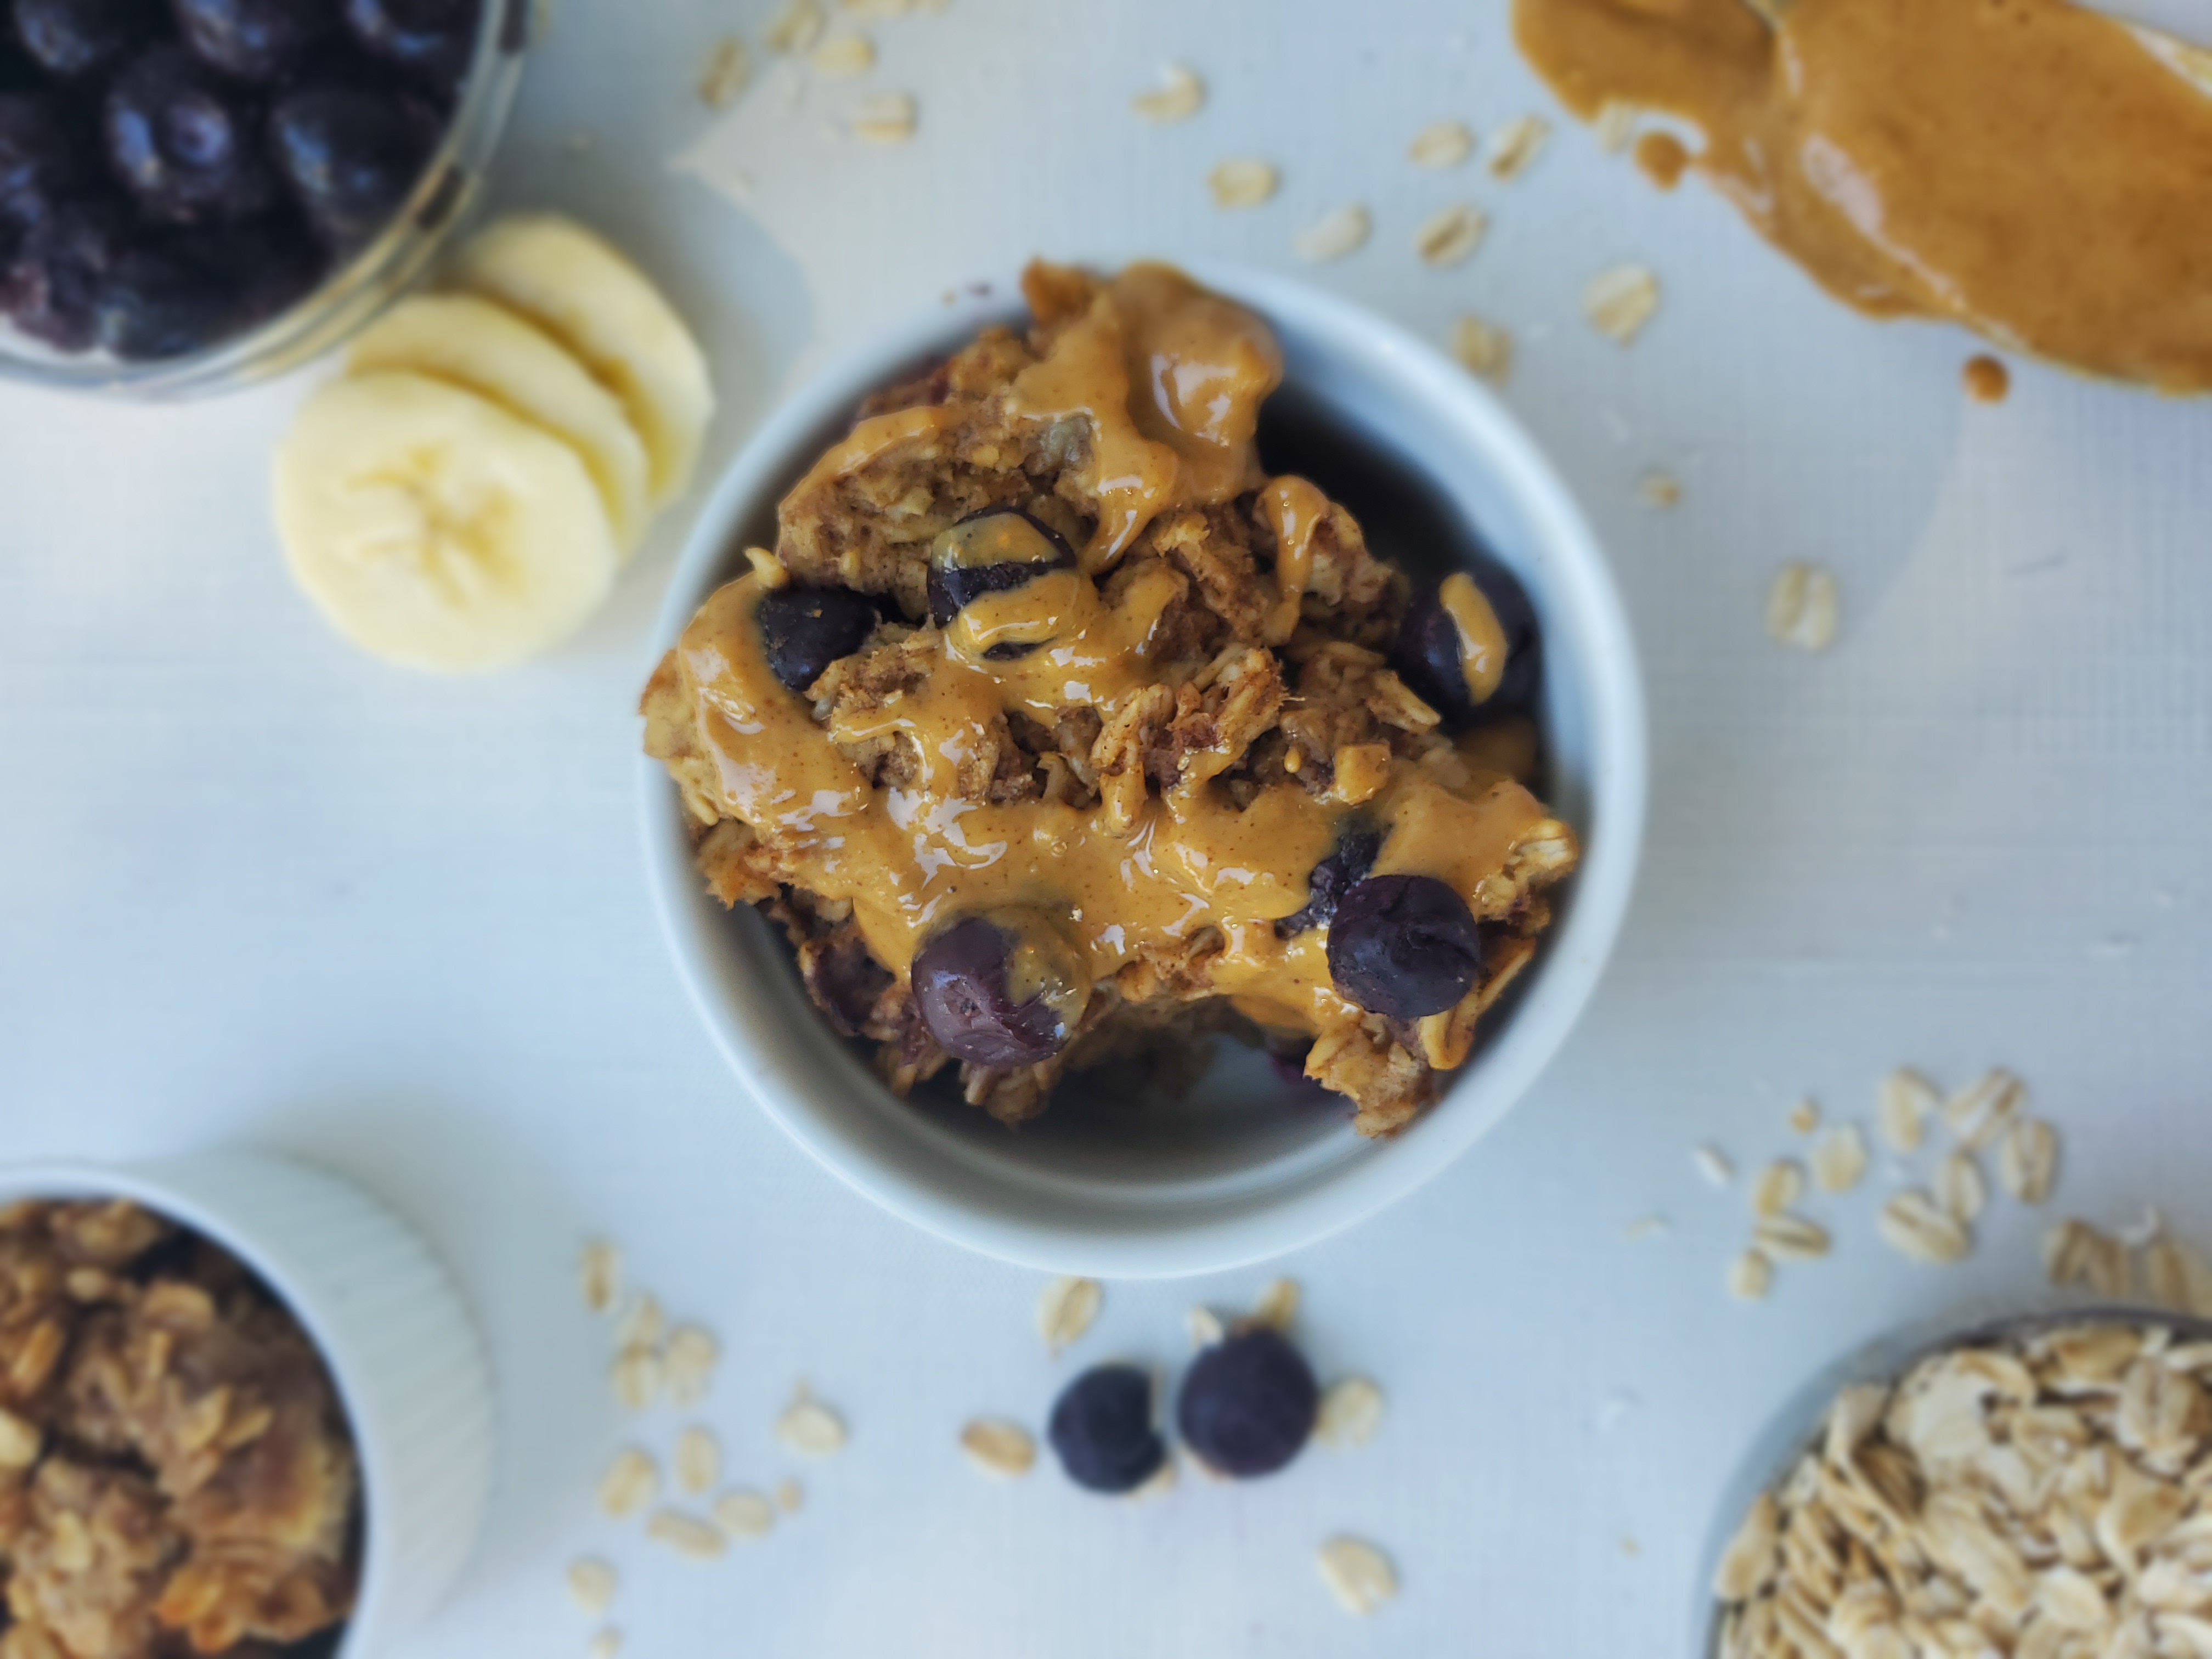 Baked Blueberry Oatmeal in a ramekin with peanut butter drizzled on top